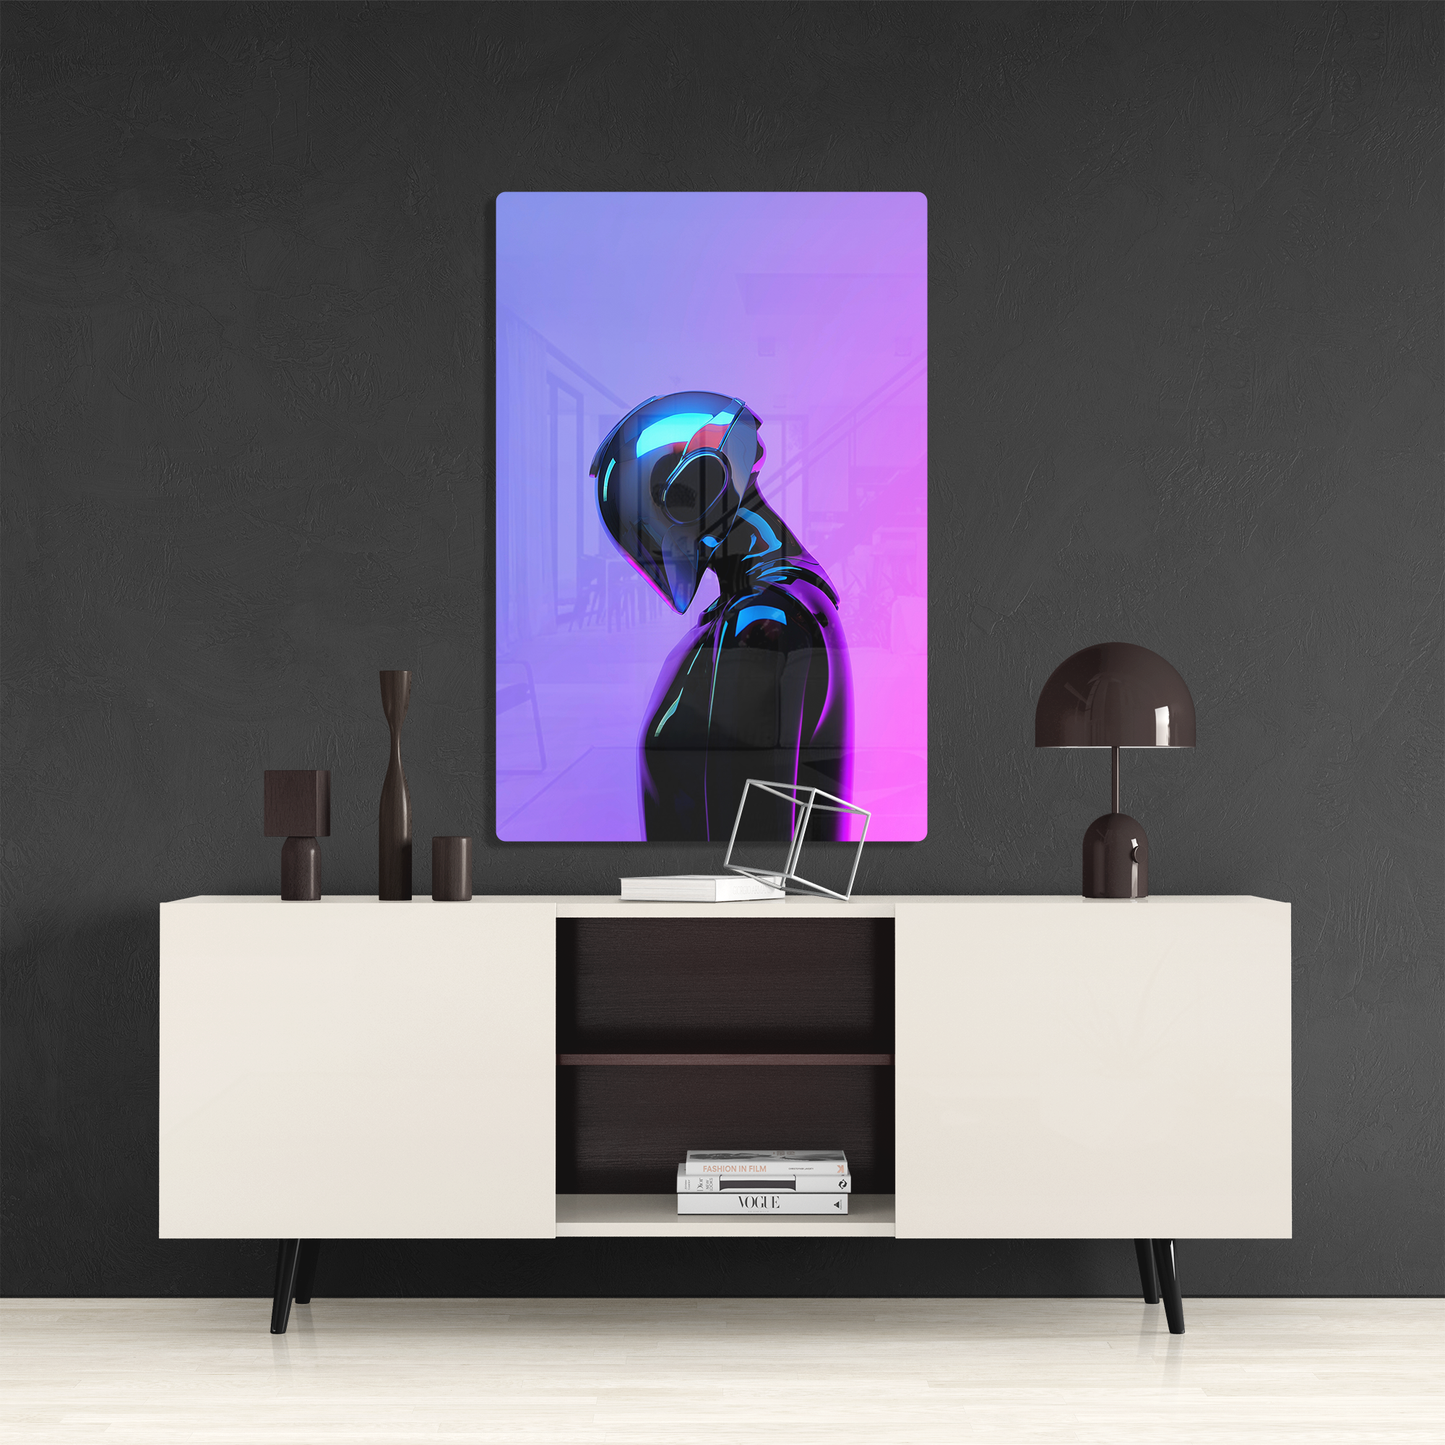 Neon Cyber Visor (Acrylic)Neon Cyber Visor acrylic print brings museum-quality art into your home. The crystal clear 1⁄4” acrylic panel gives a smooth glass-like finish for stunning prints. SRimaGallery